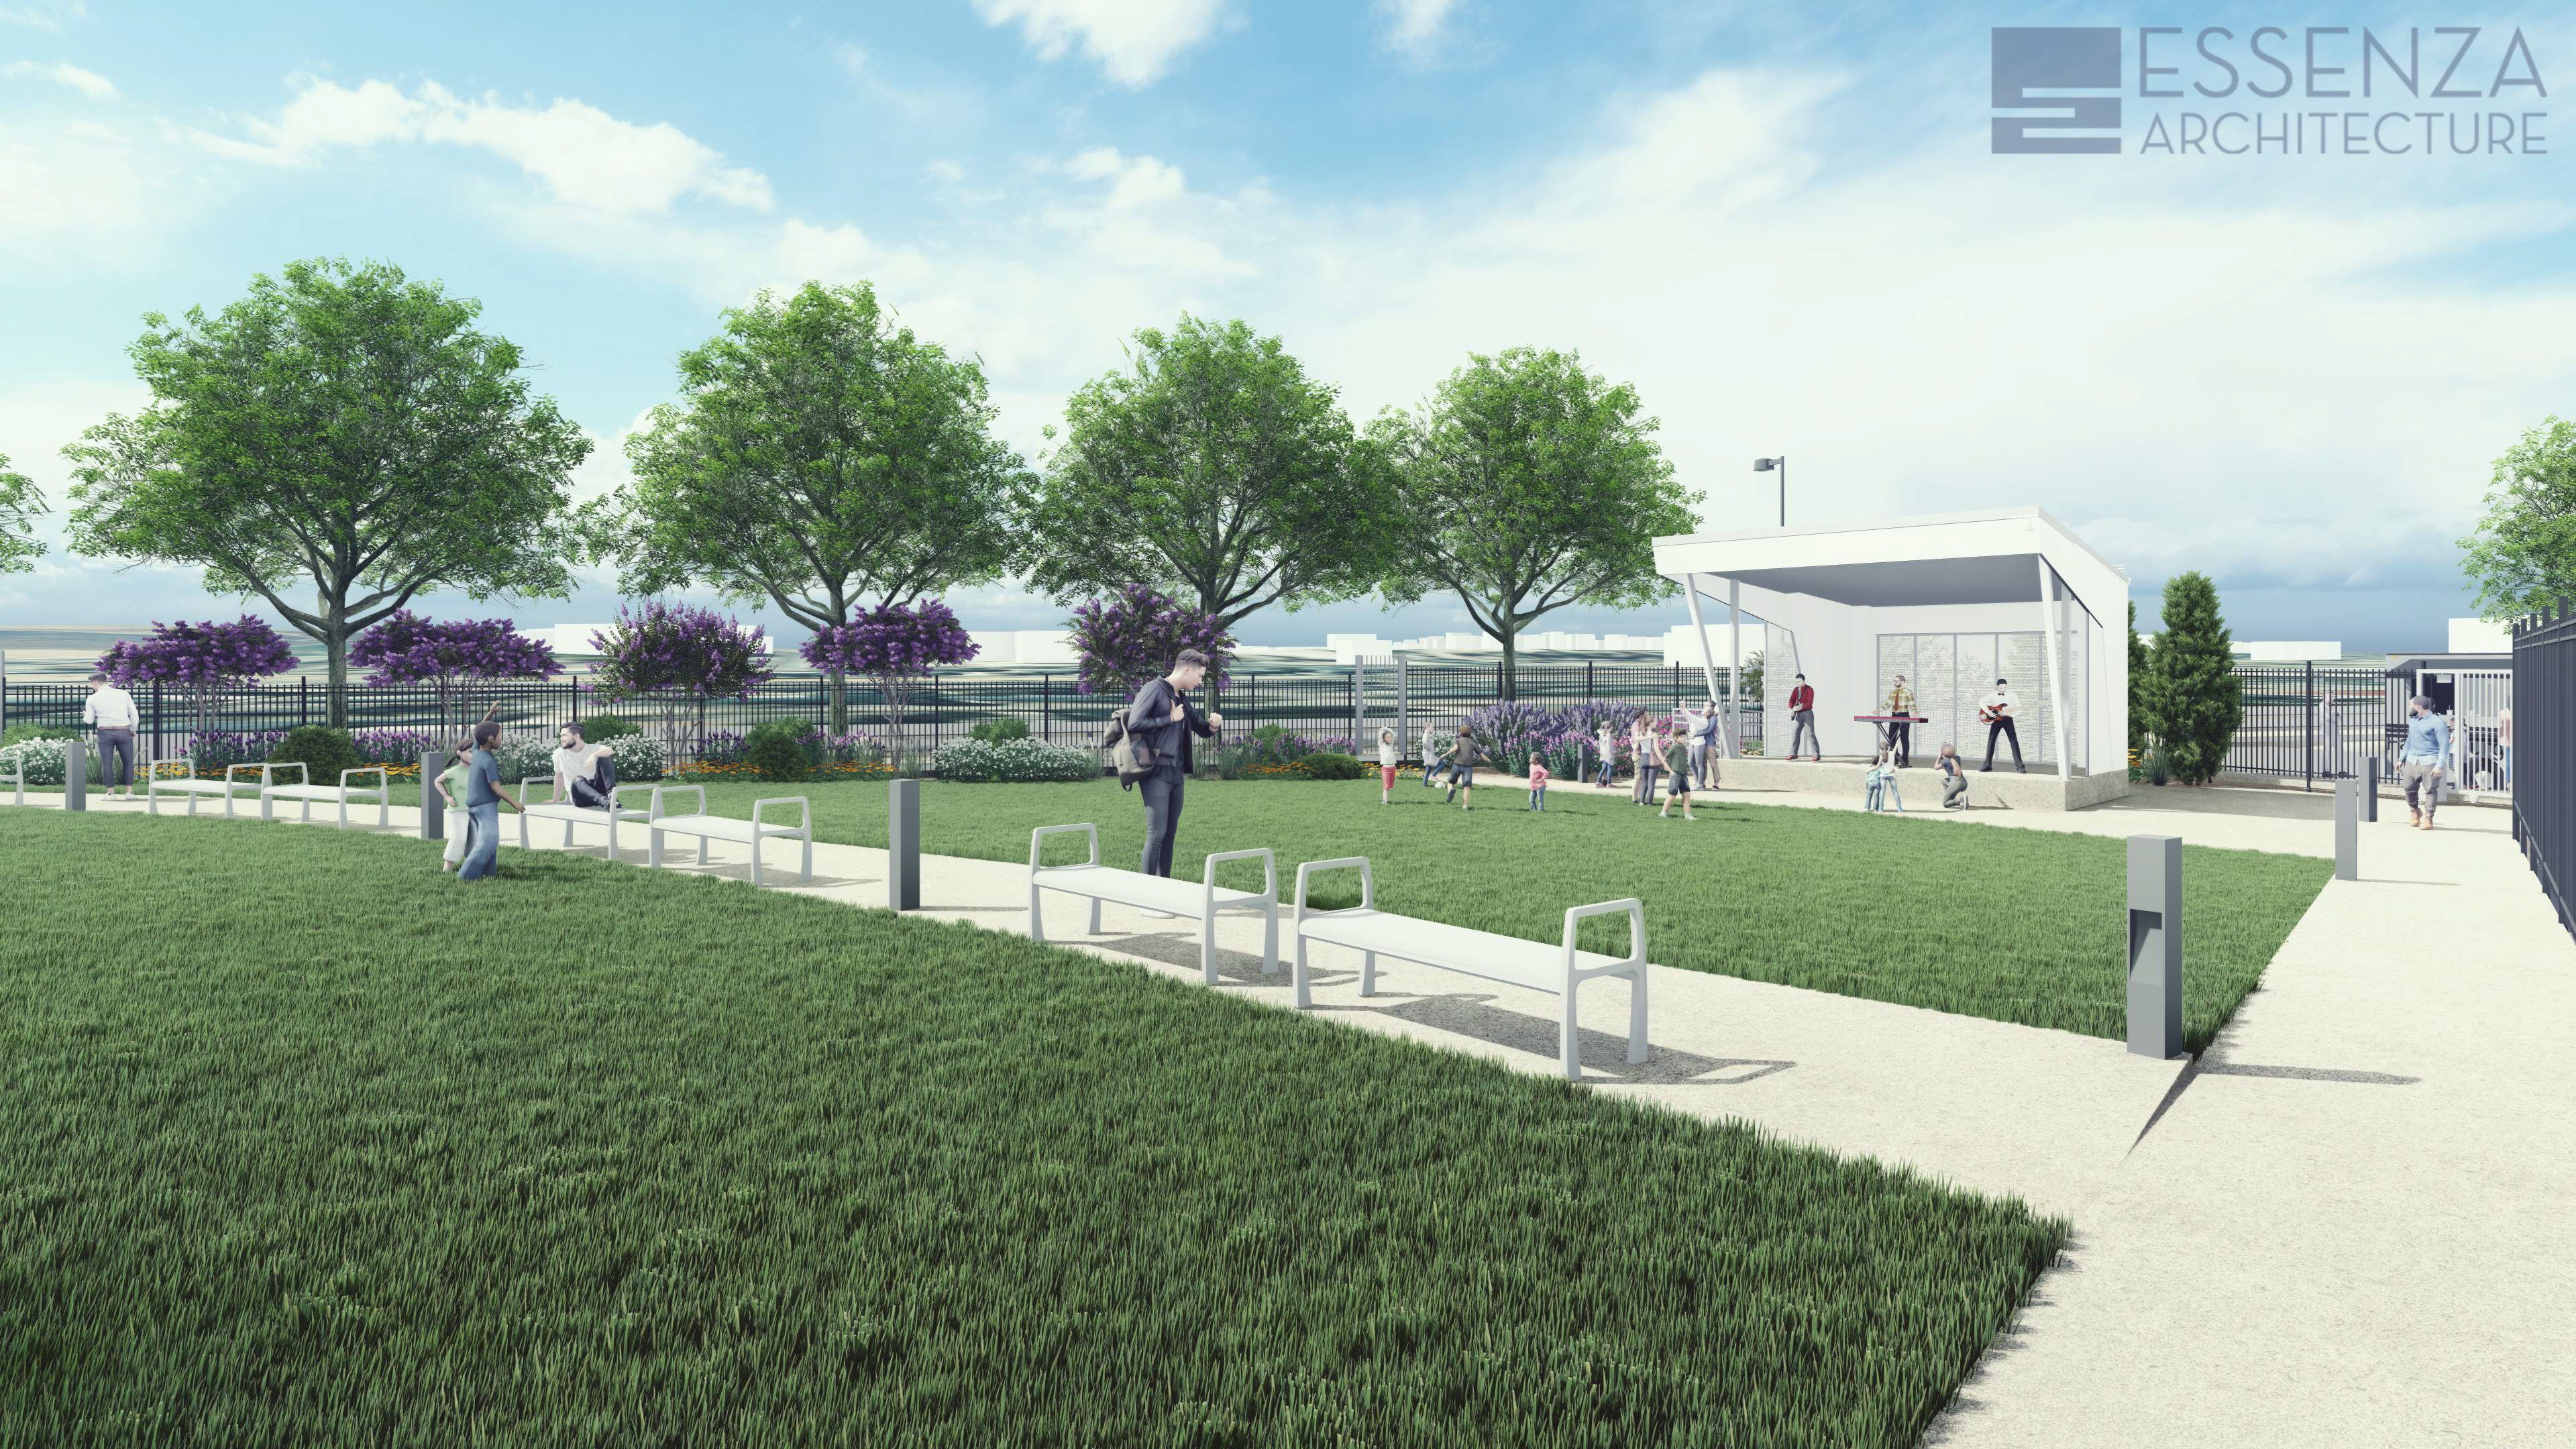 Digitally rendered image of courtyard after updates have completed. Shows walkway with benches, grassy area, trees, and a stage.